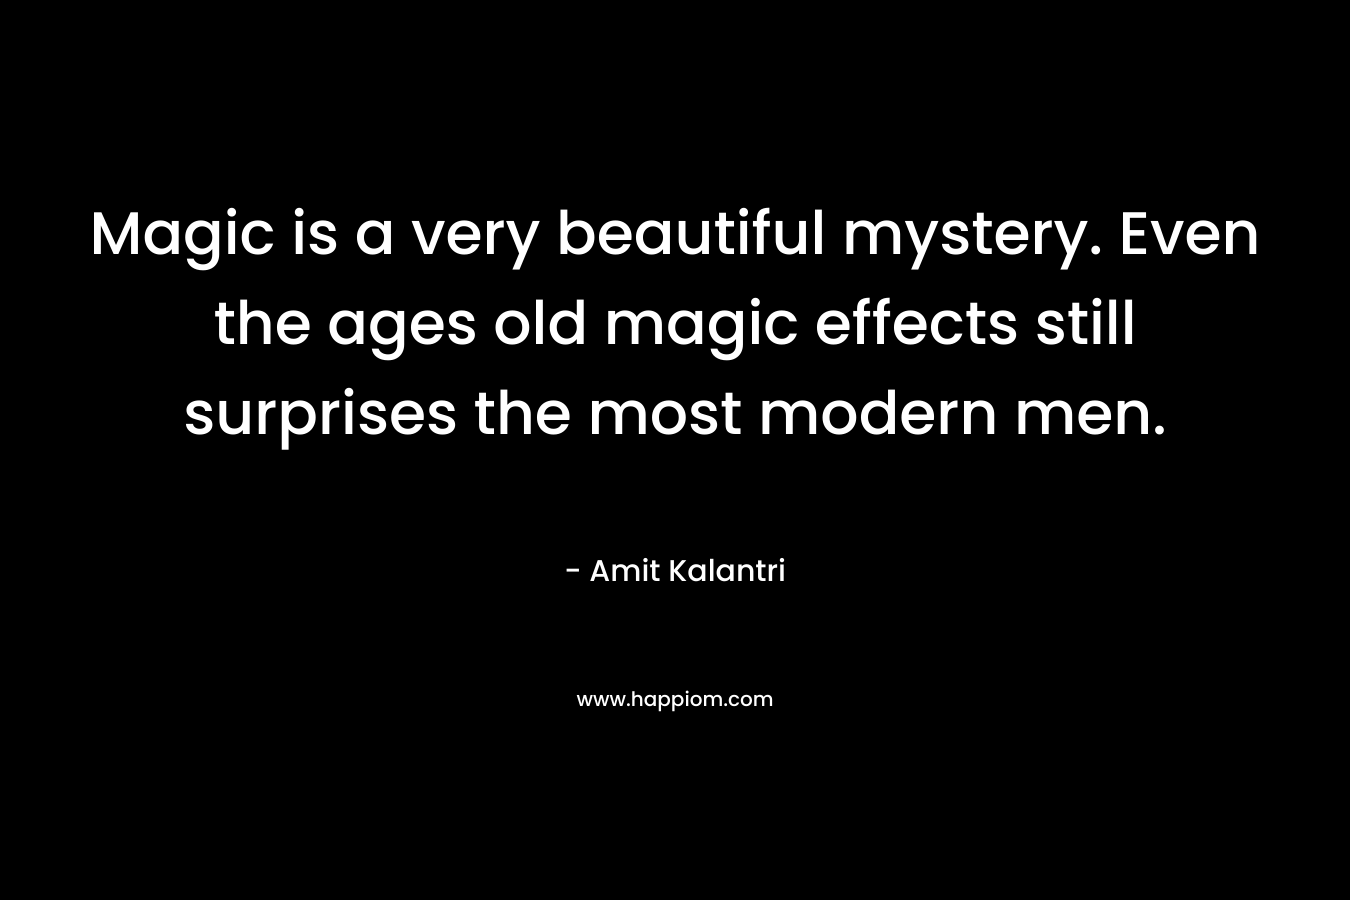 Magic is a very beautiful mystery. Even the ages old magic effects still surprises the most modern men.